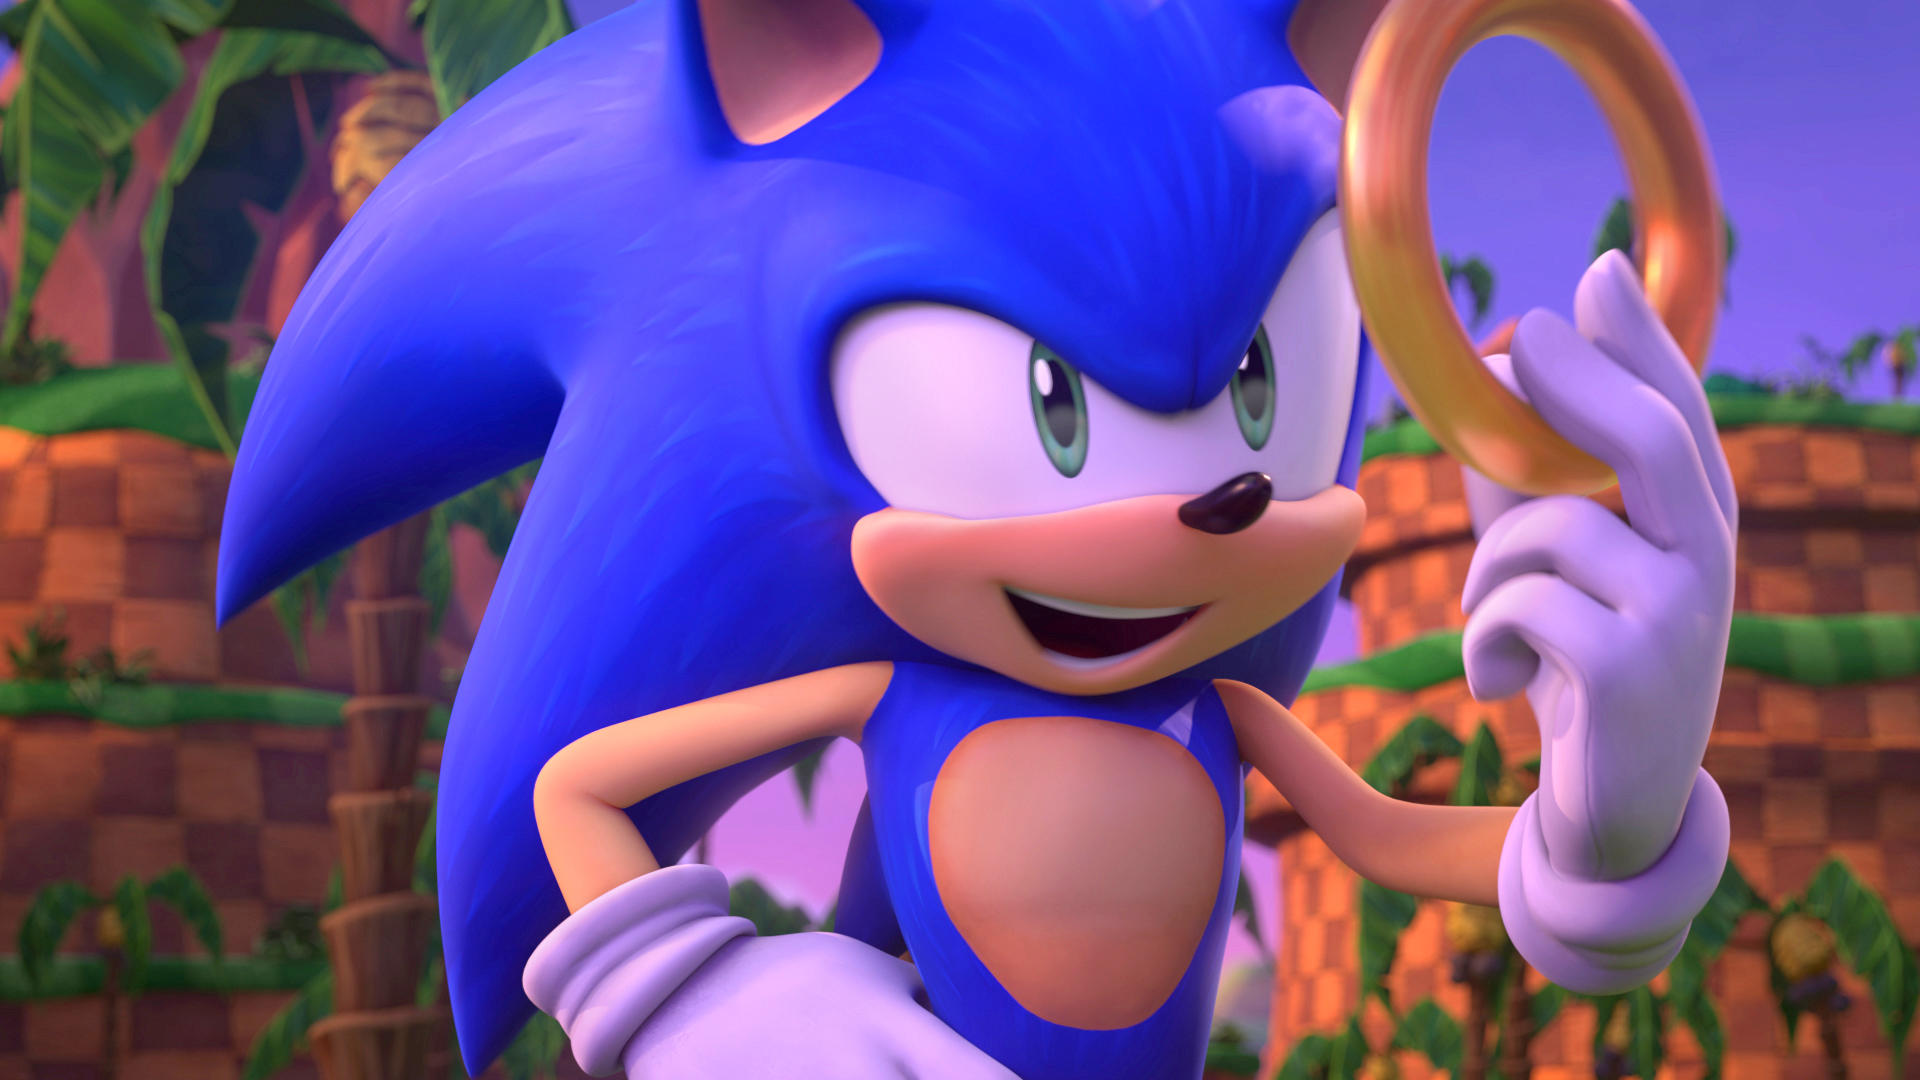 Here's How Sonic the Hedgehog Looks in Netflix's Sonic Prime Show